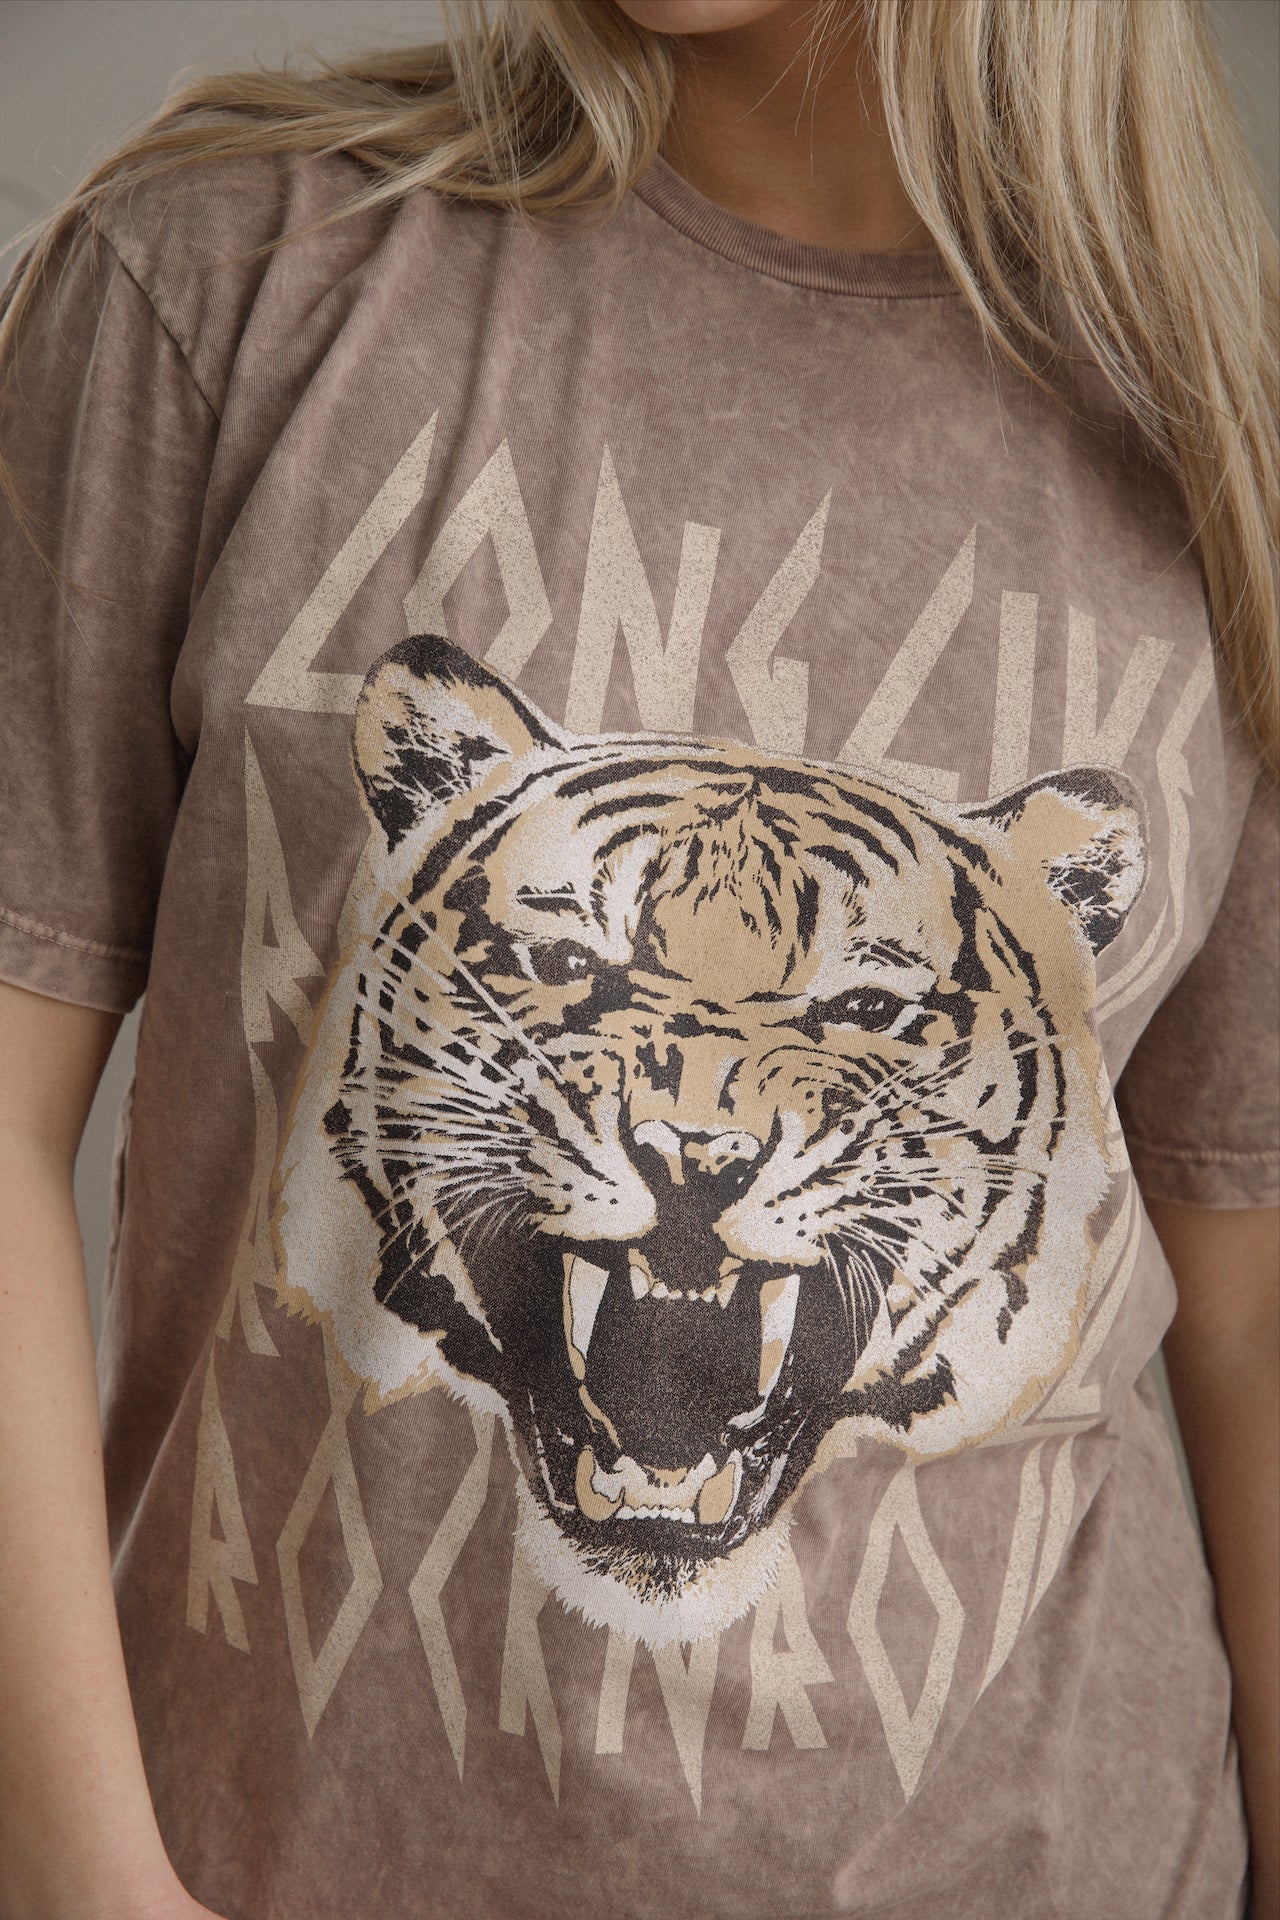 tiger print long live rock and roll graphic tee on a brown cotton tshirt